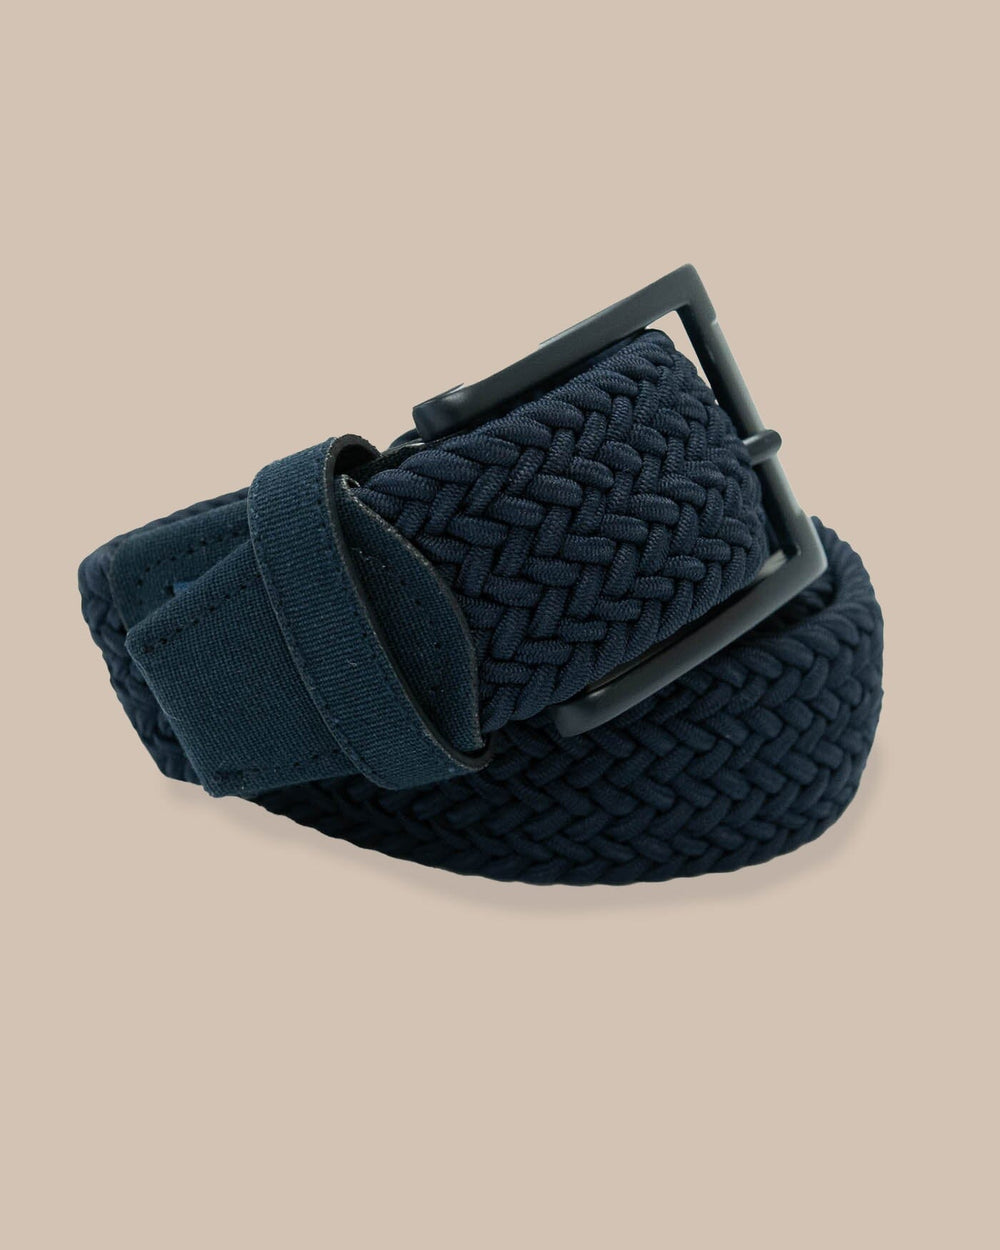 The front view of the Southern Tide Caddie Braided Belt by Southern Tide - True Navy